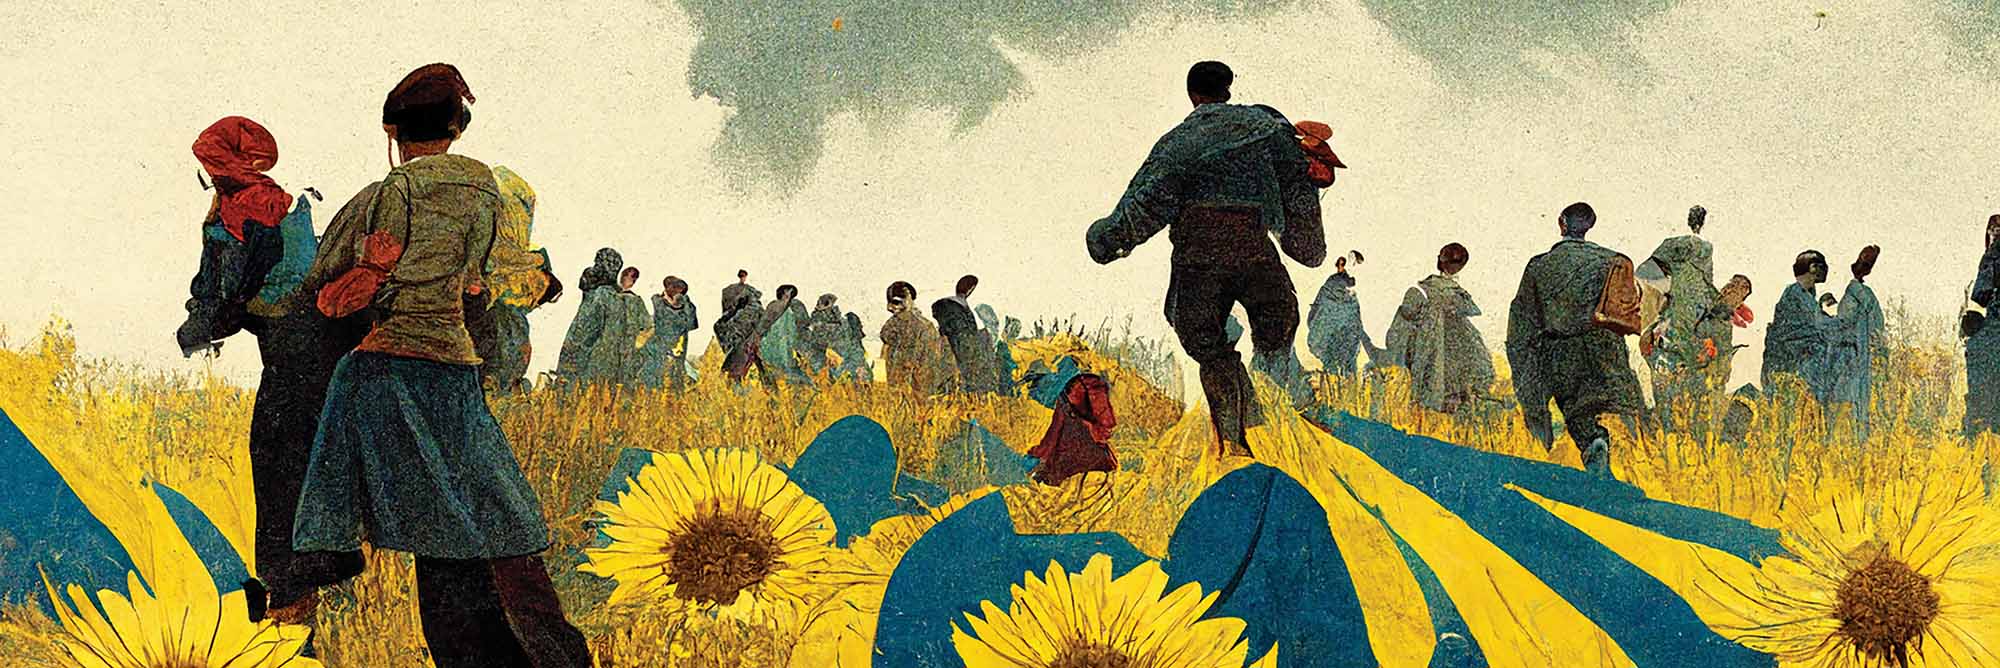 Illustration of a field of sunflowers with people walking away. One person leaves a trail of yellow and blue behind them.